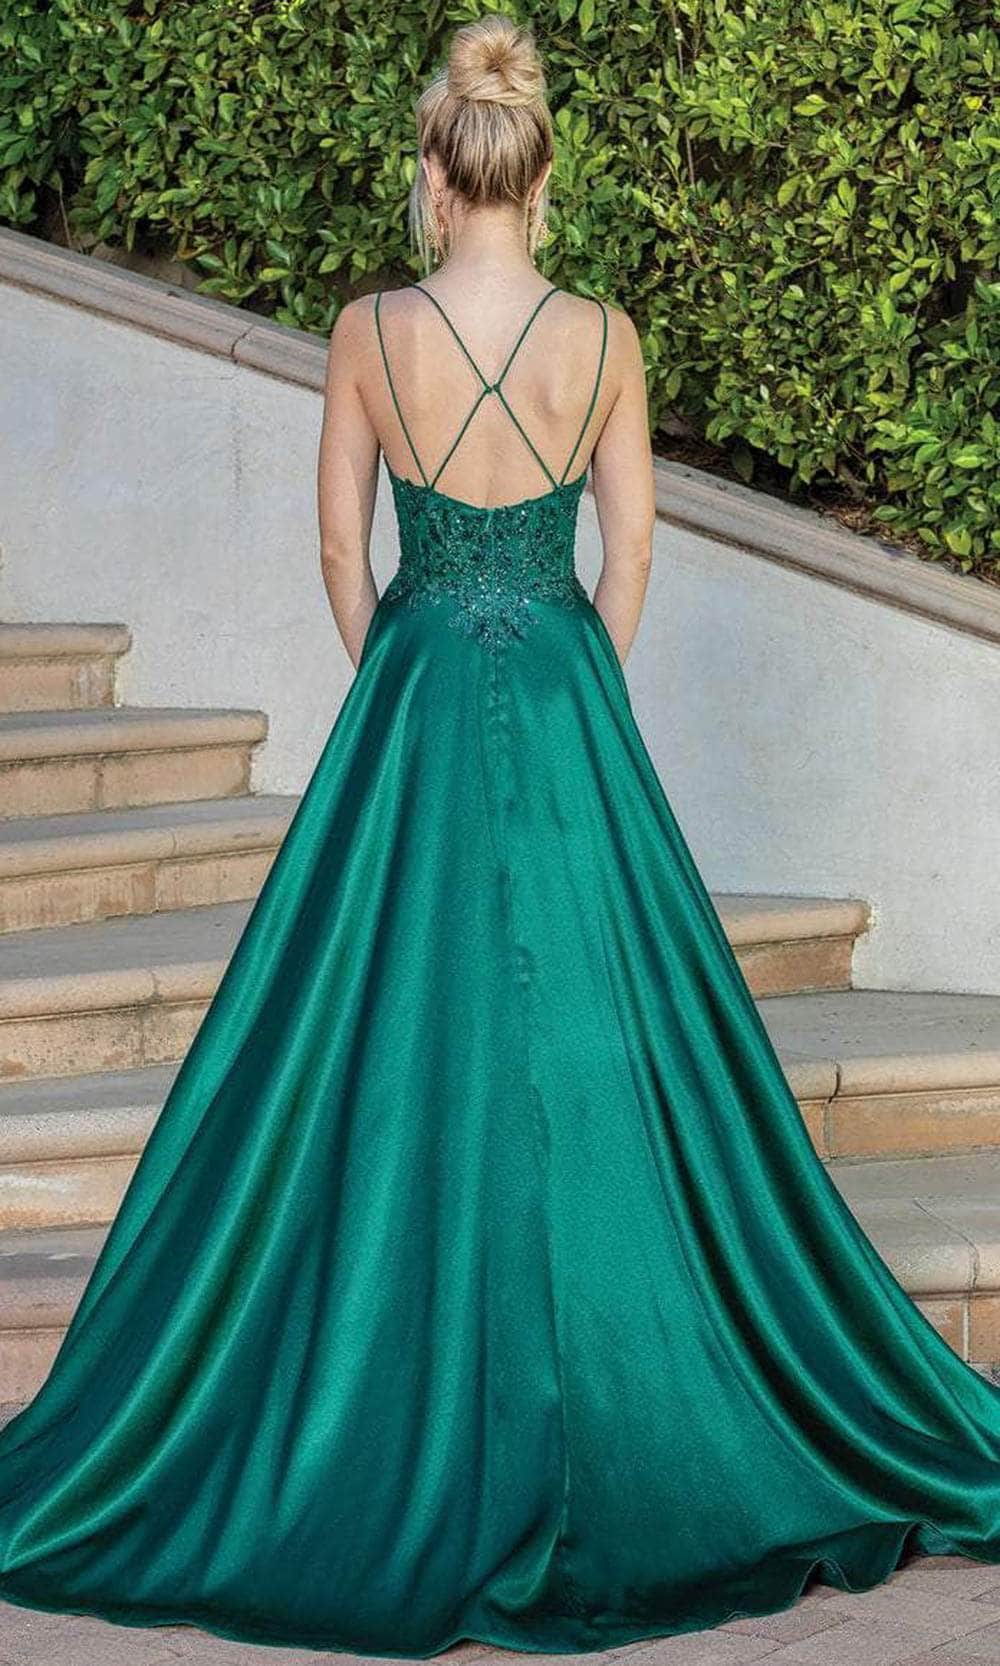 Dancing Queen 4247 - Embroidered Scoop Neck Long Dress Special Occasion Dress